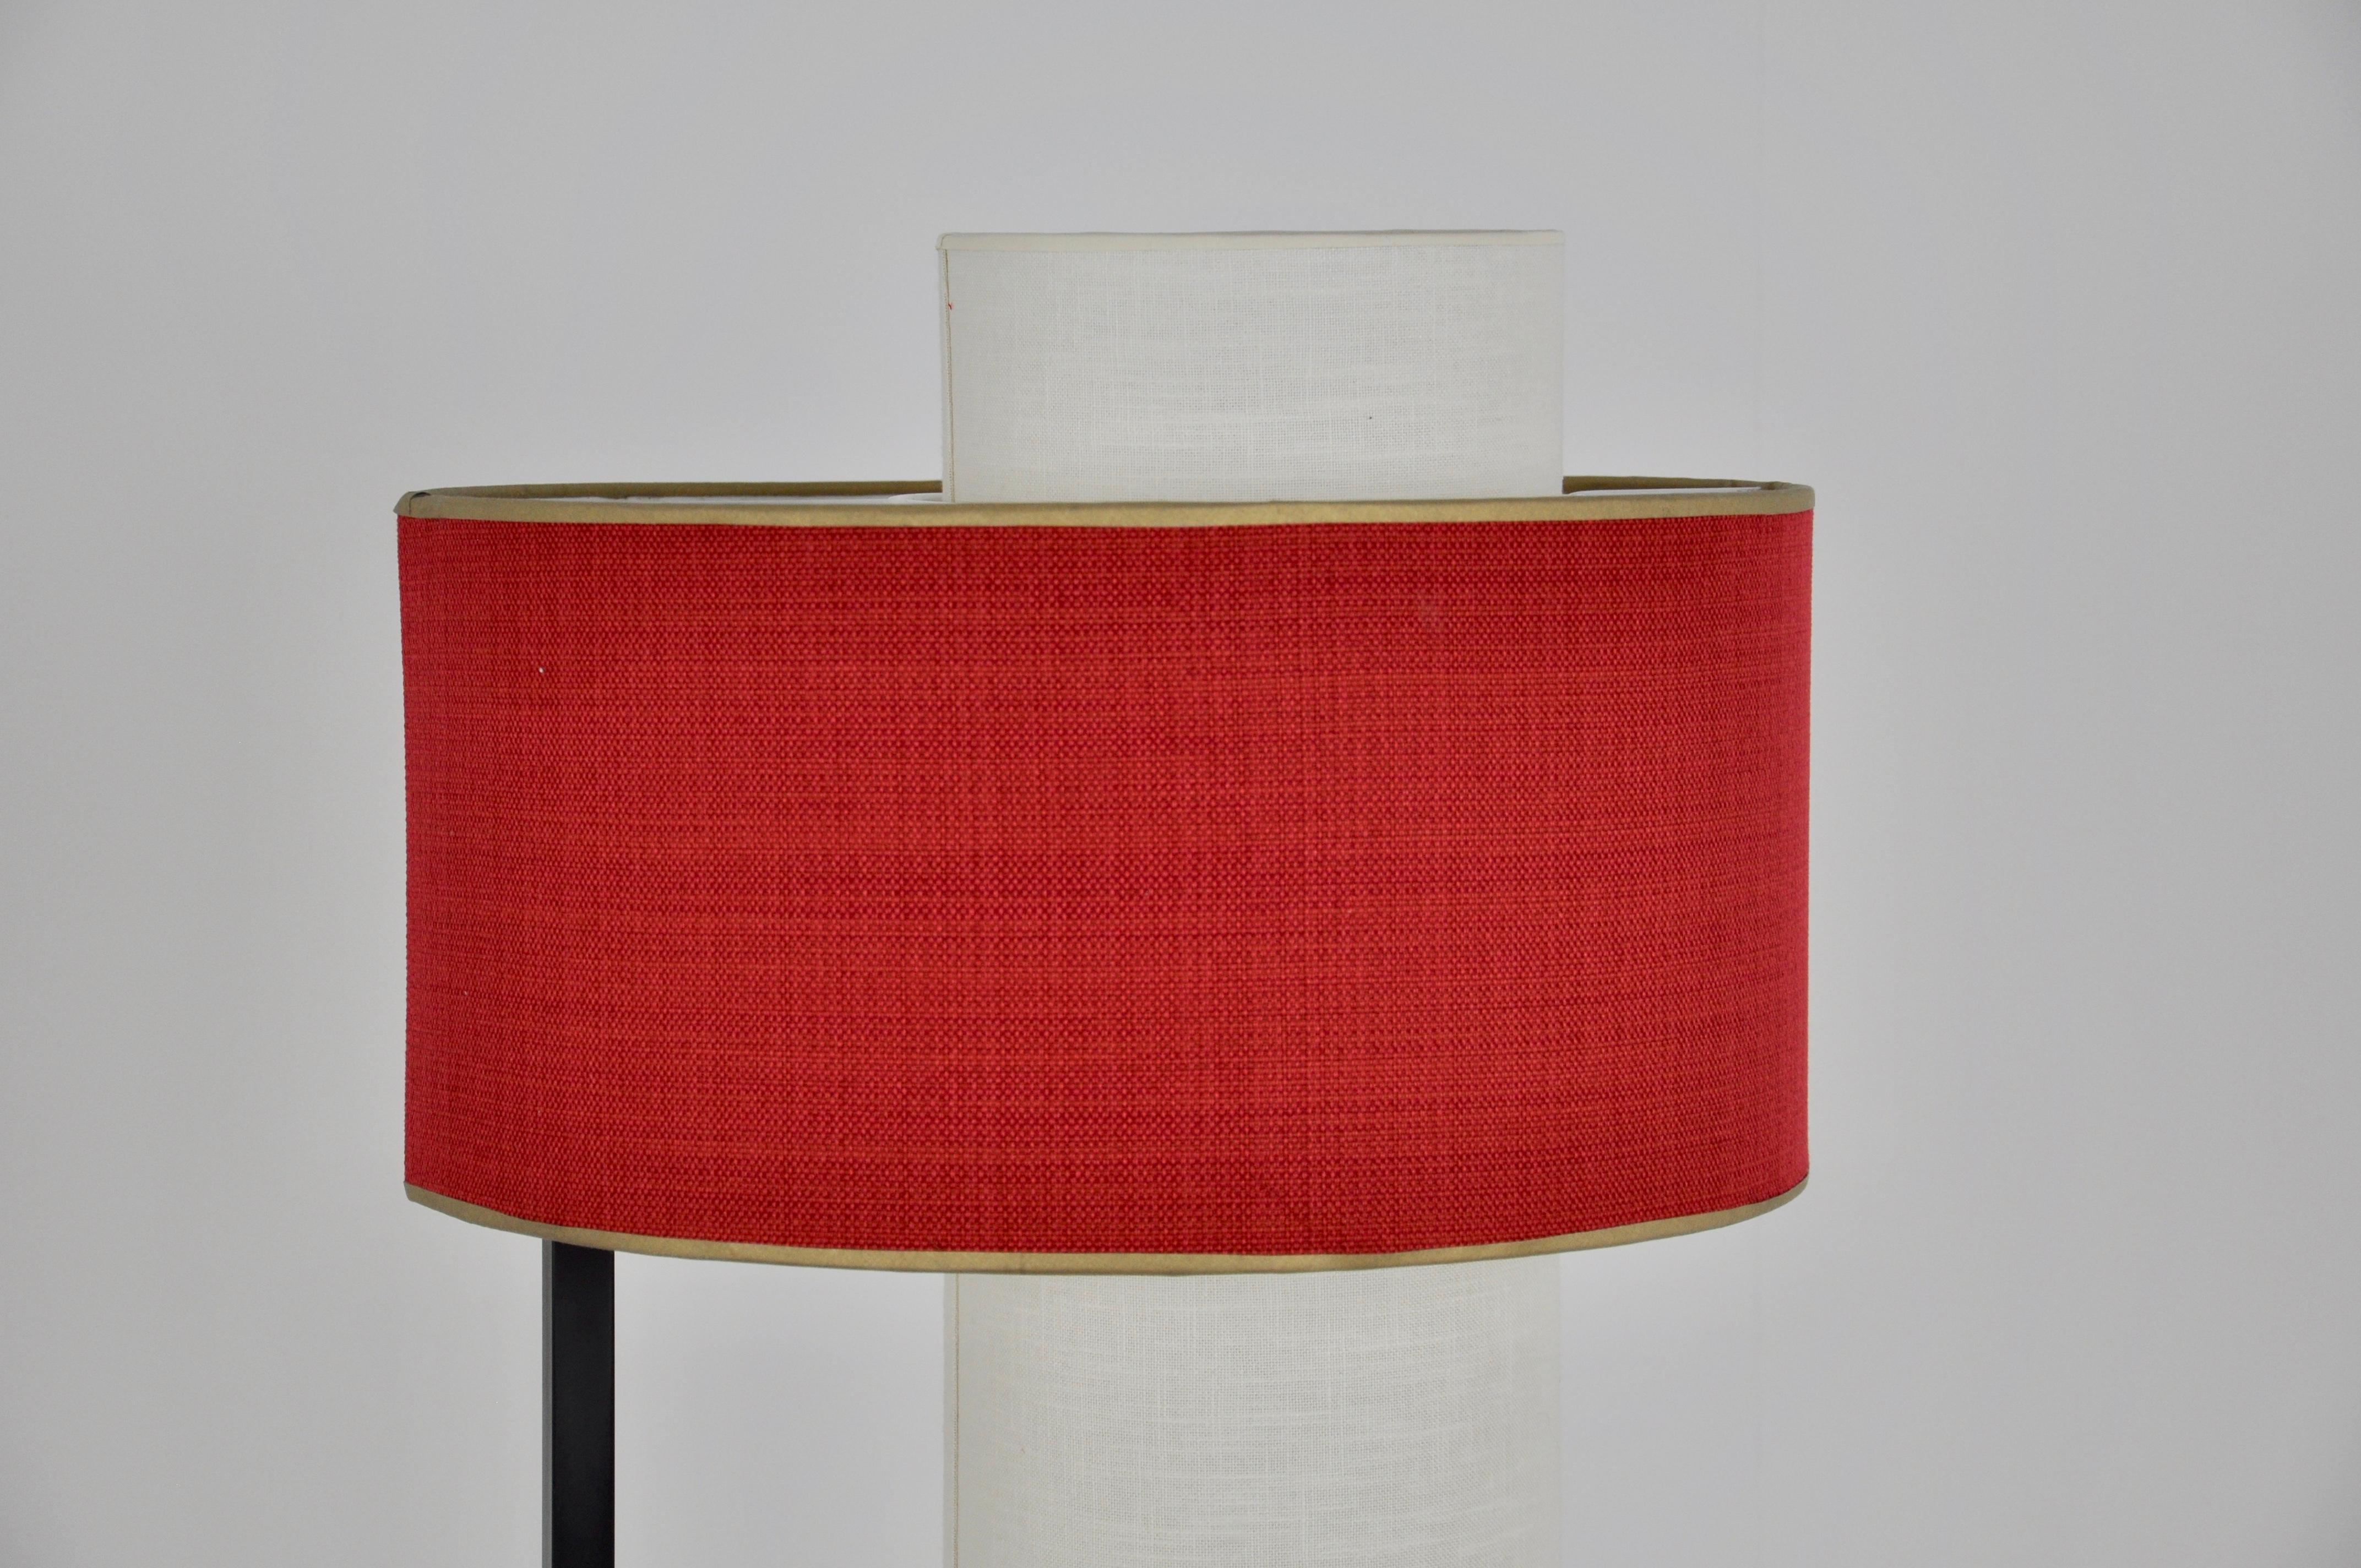 Floor lamp Maison Arlus. Red and cream colored abajour. Light wear and tear due to time and use.